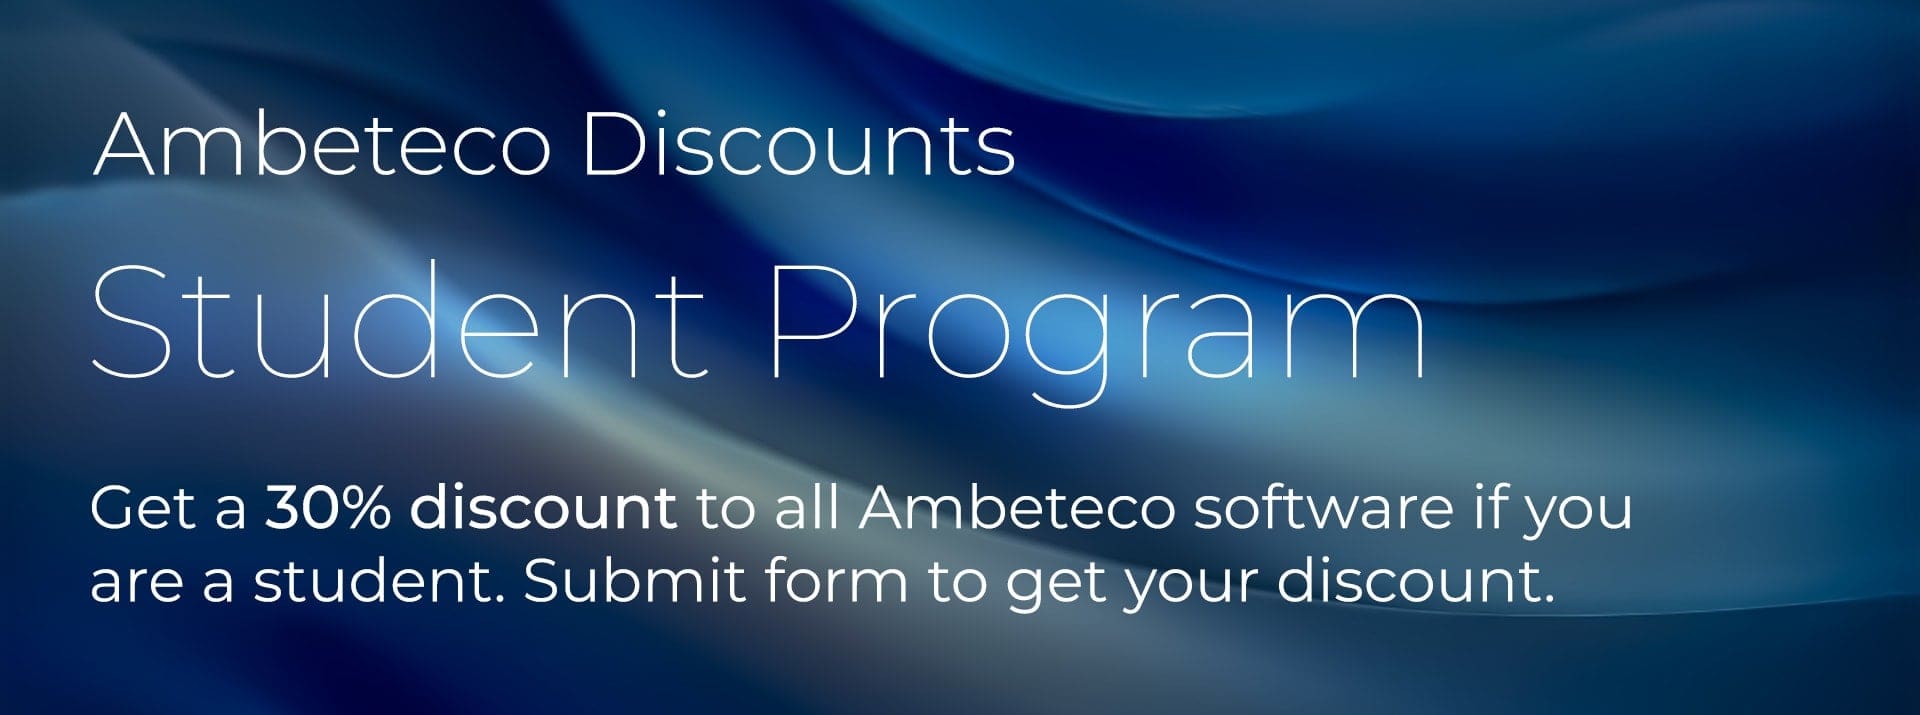 Ambeteco Students Discount program. Join now to get 30% discounts on Ambeteco software